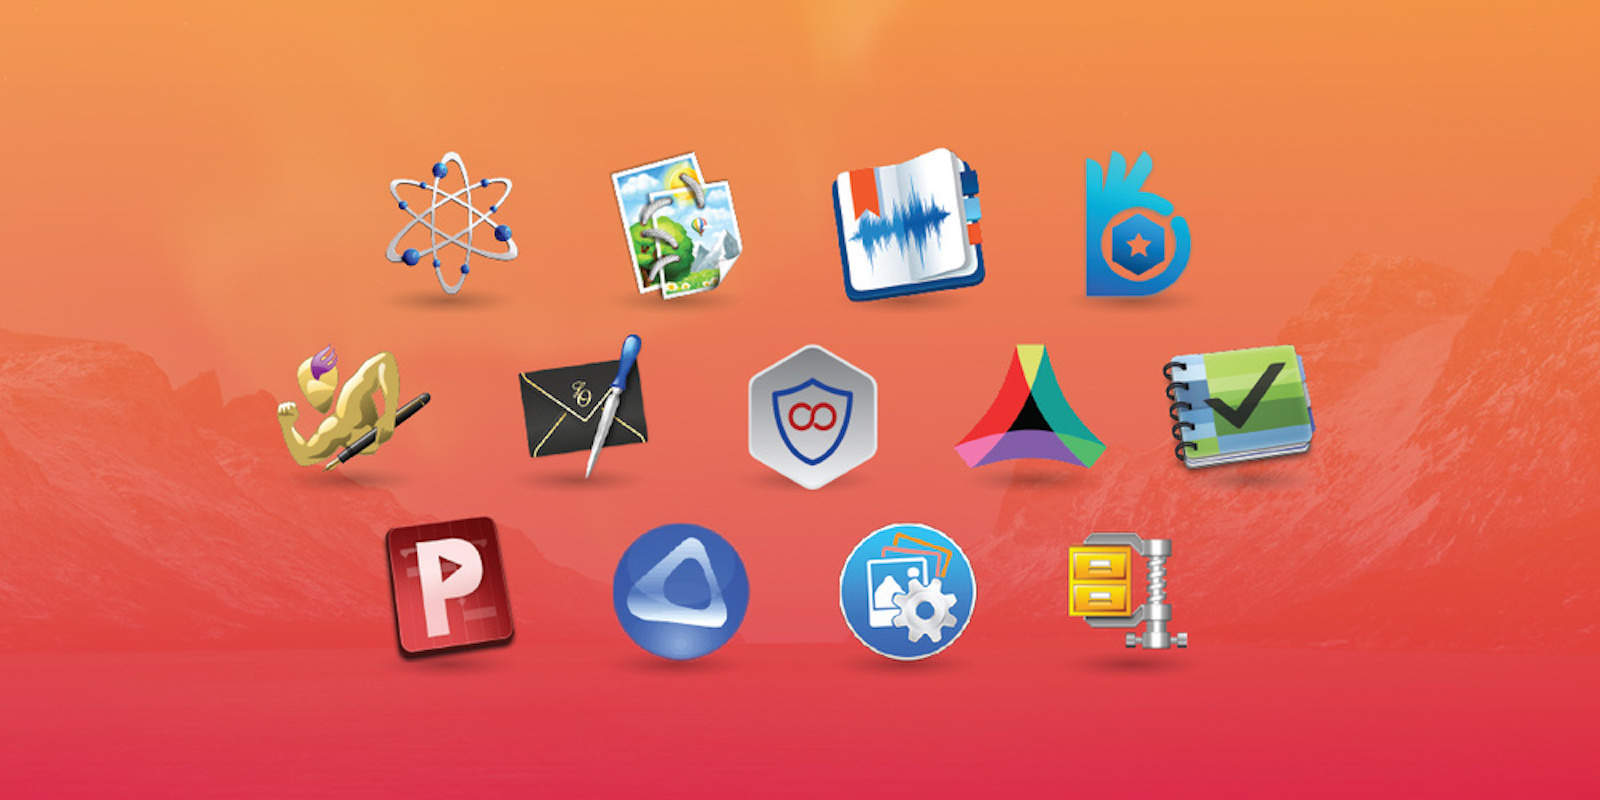 This packed bundle of award-winning Mac apps is yours for whatever you're ready to pay